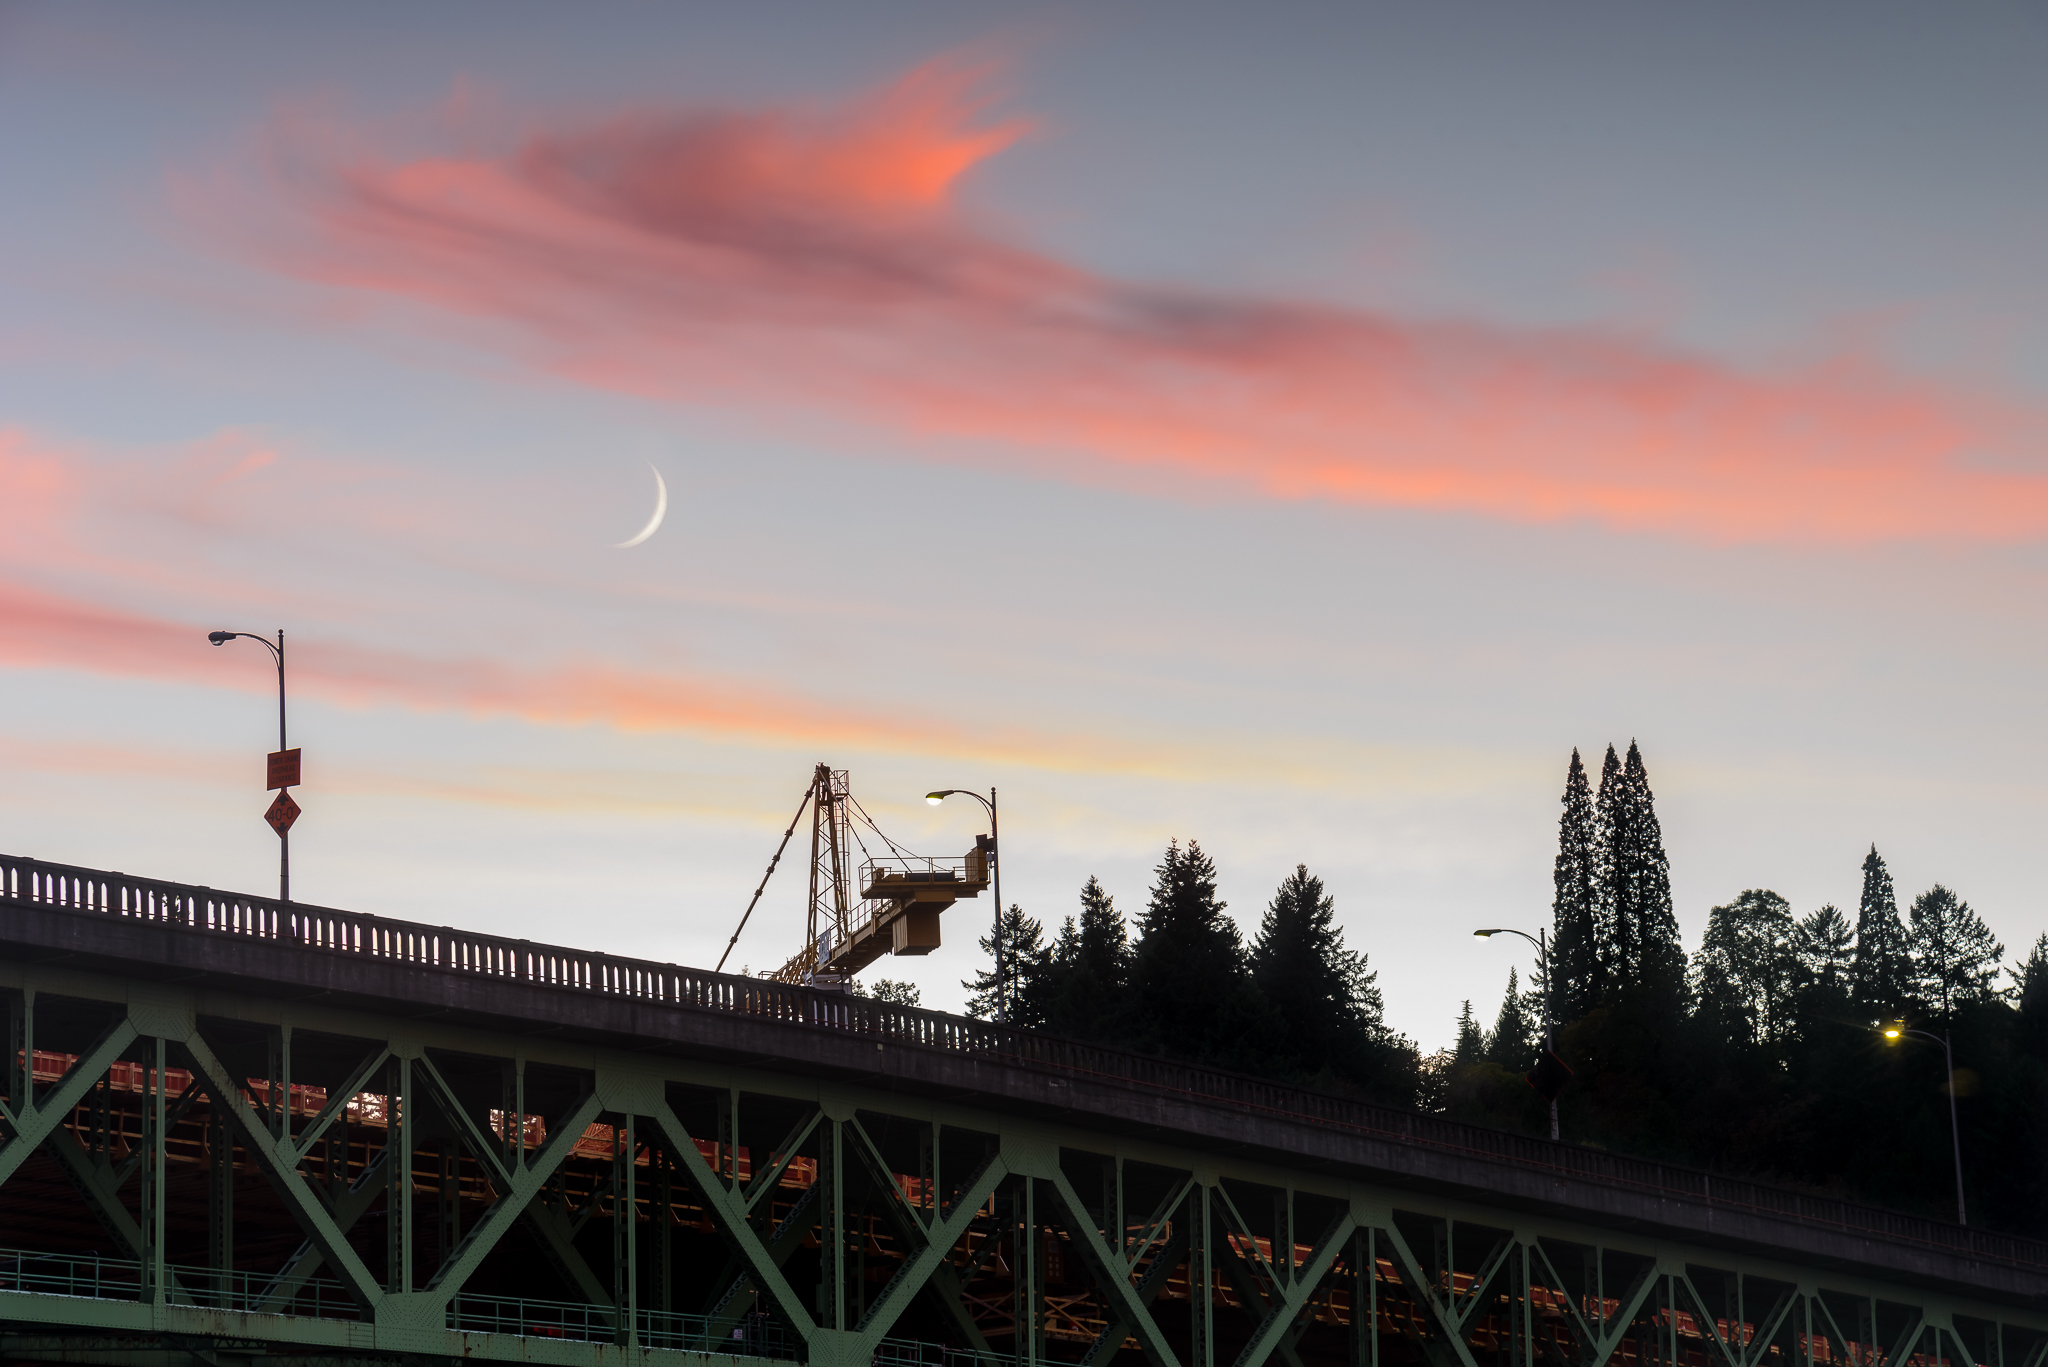  The Sellwood Bridge and a wee sliver of moon welcomed me on my first night in town.&nbsp; Sellwood, Portland. 